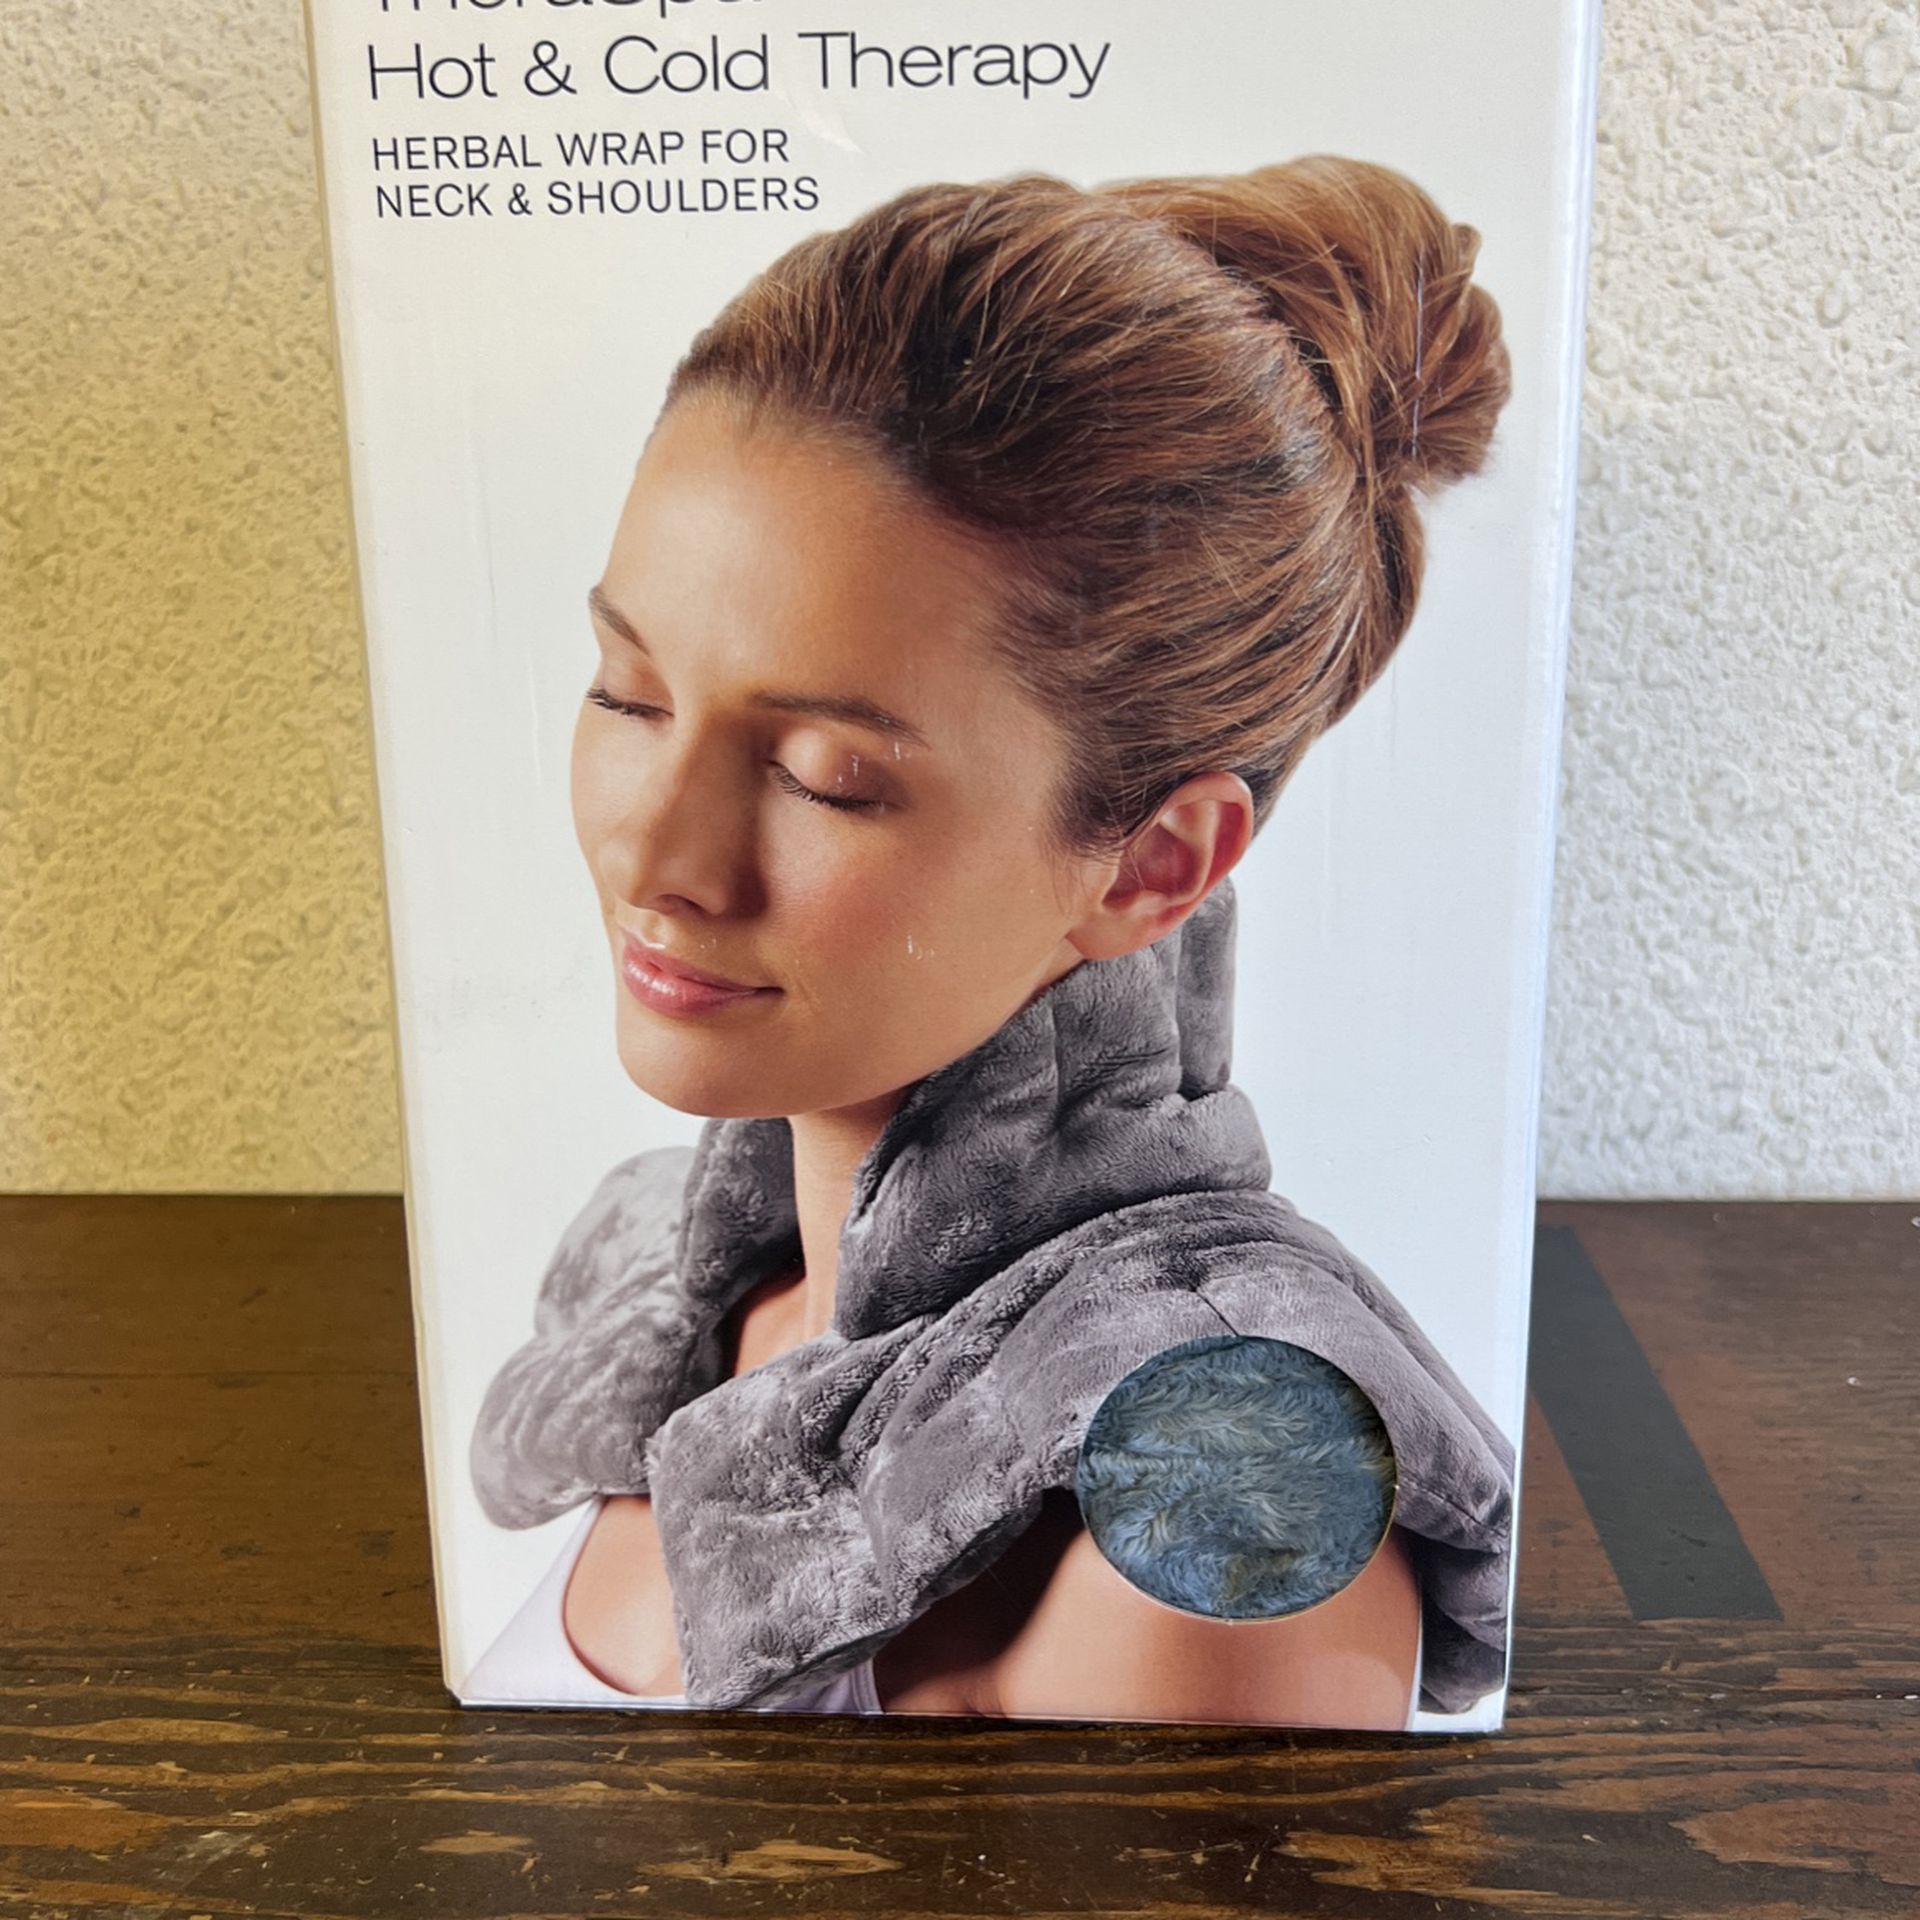 Brookstone Sarah spa hot and cold therapy herbal wrap for neck and shoulders